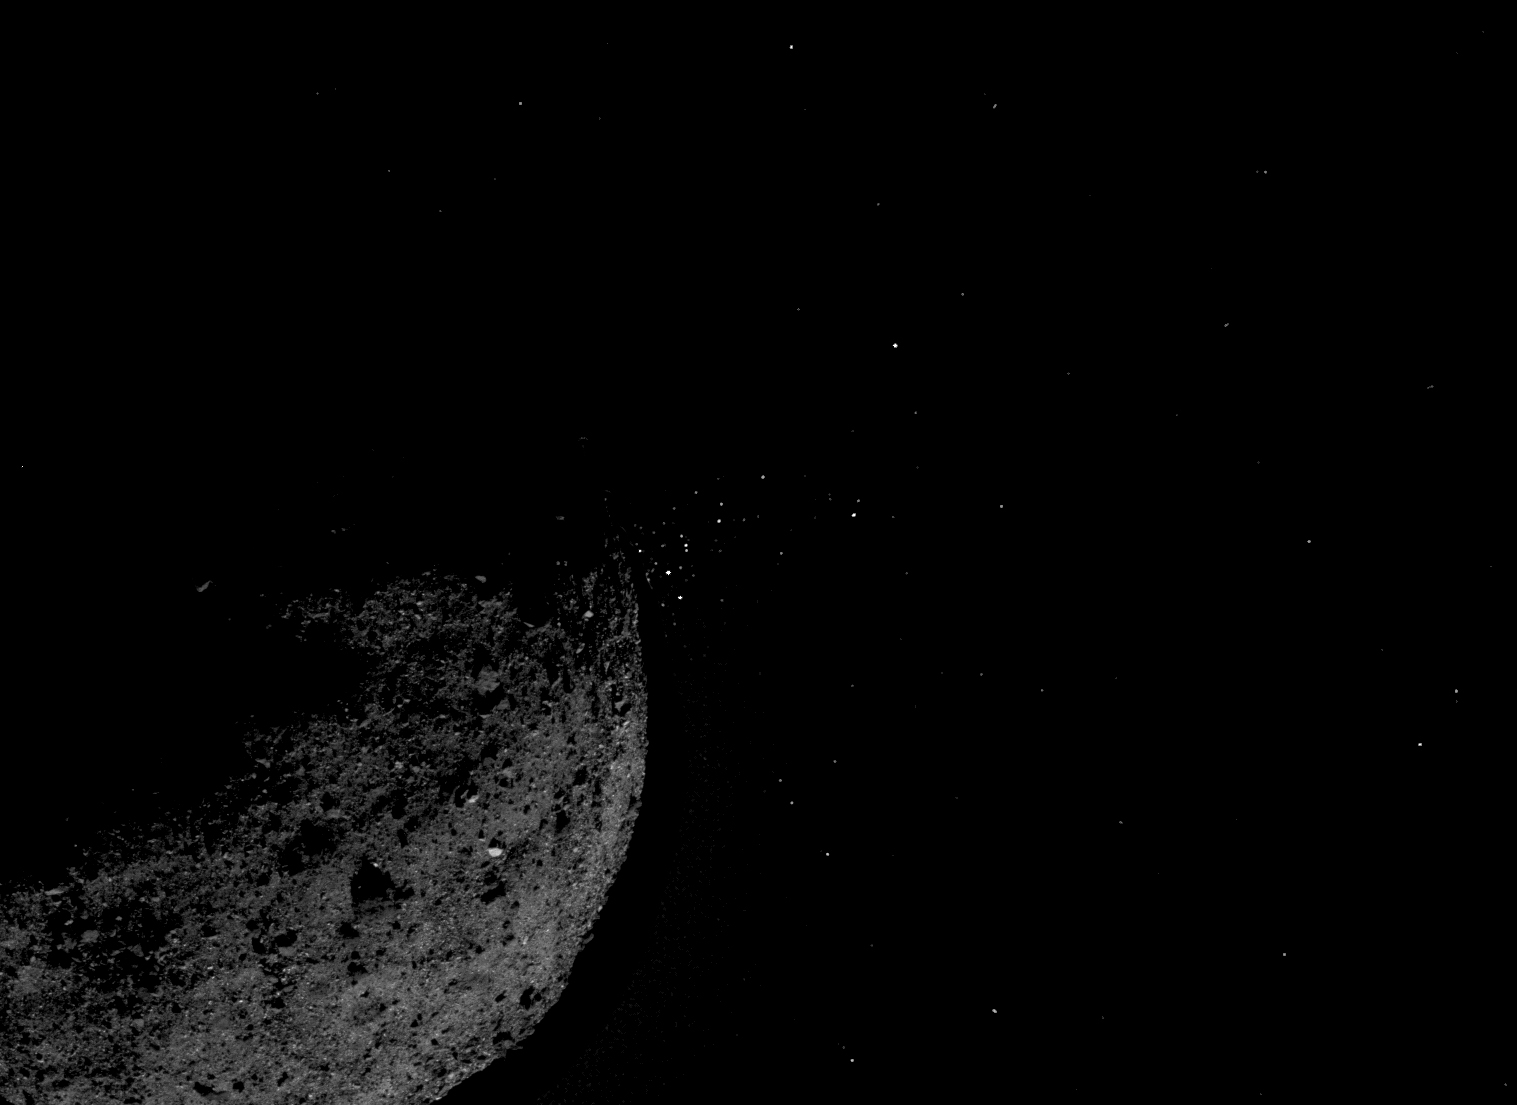 Asteroid Bennu ejecting particles from its surface on Jan. 19, created by combining two images from NASA's OSIRIS-REx spacecraft processed by optical navigation technology